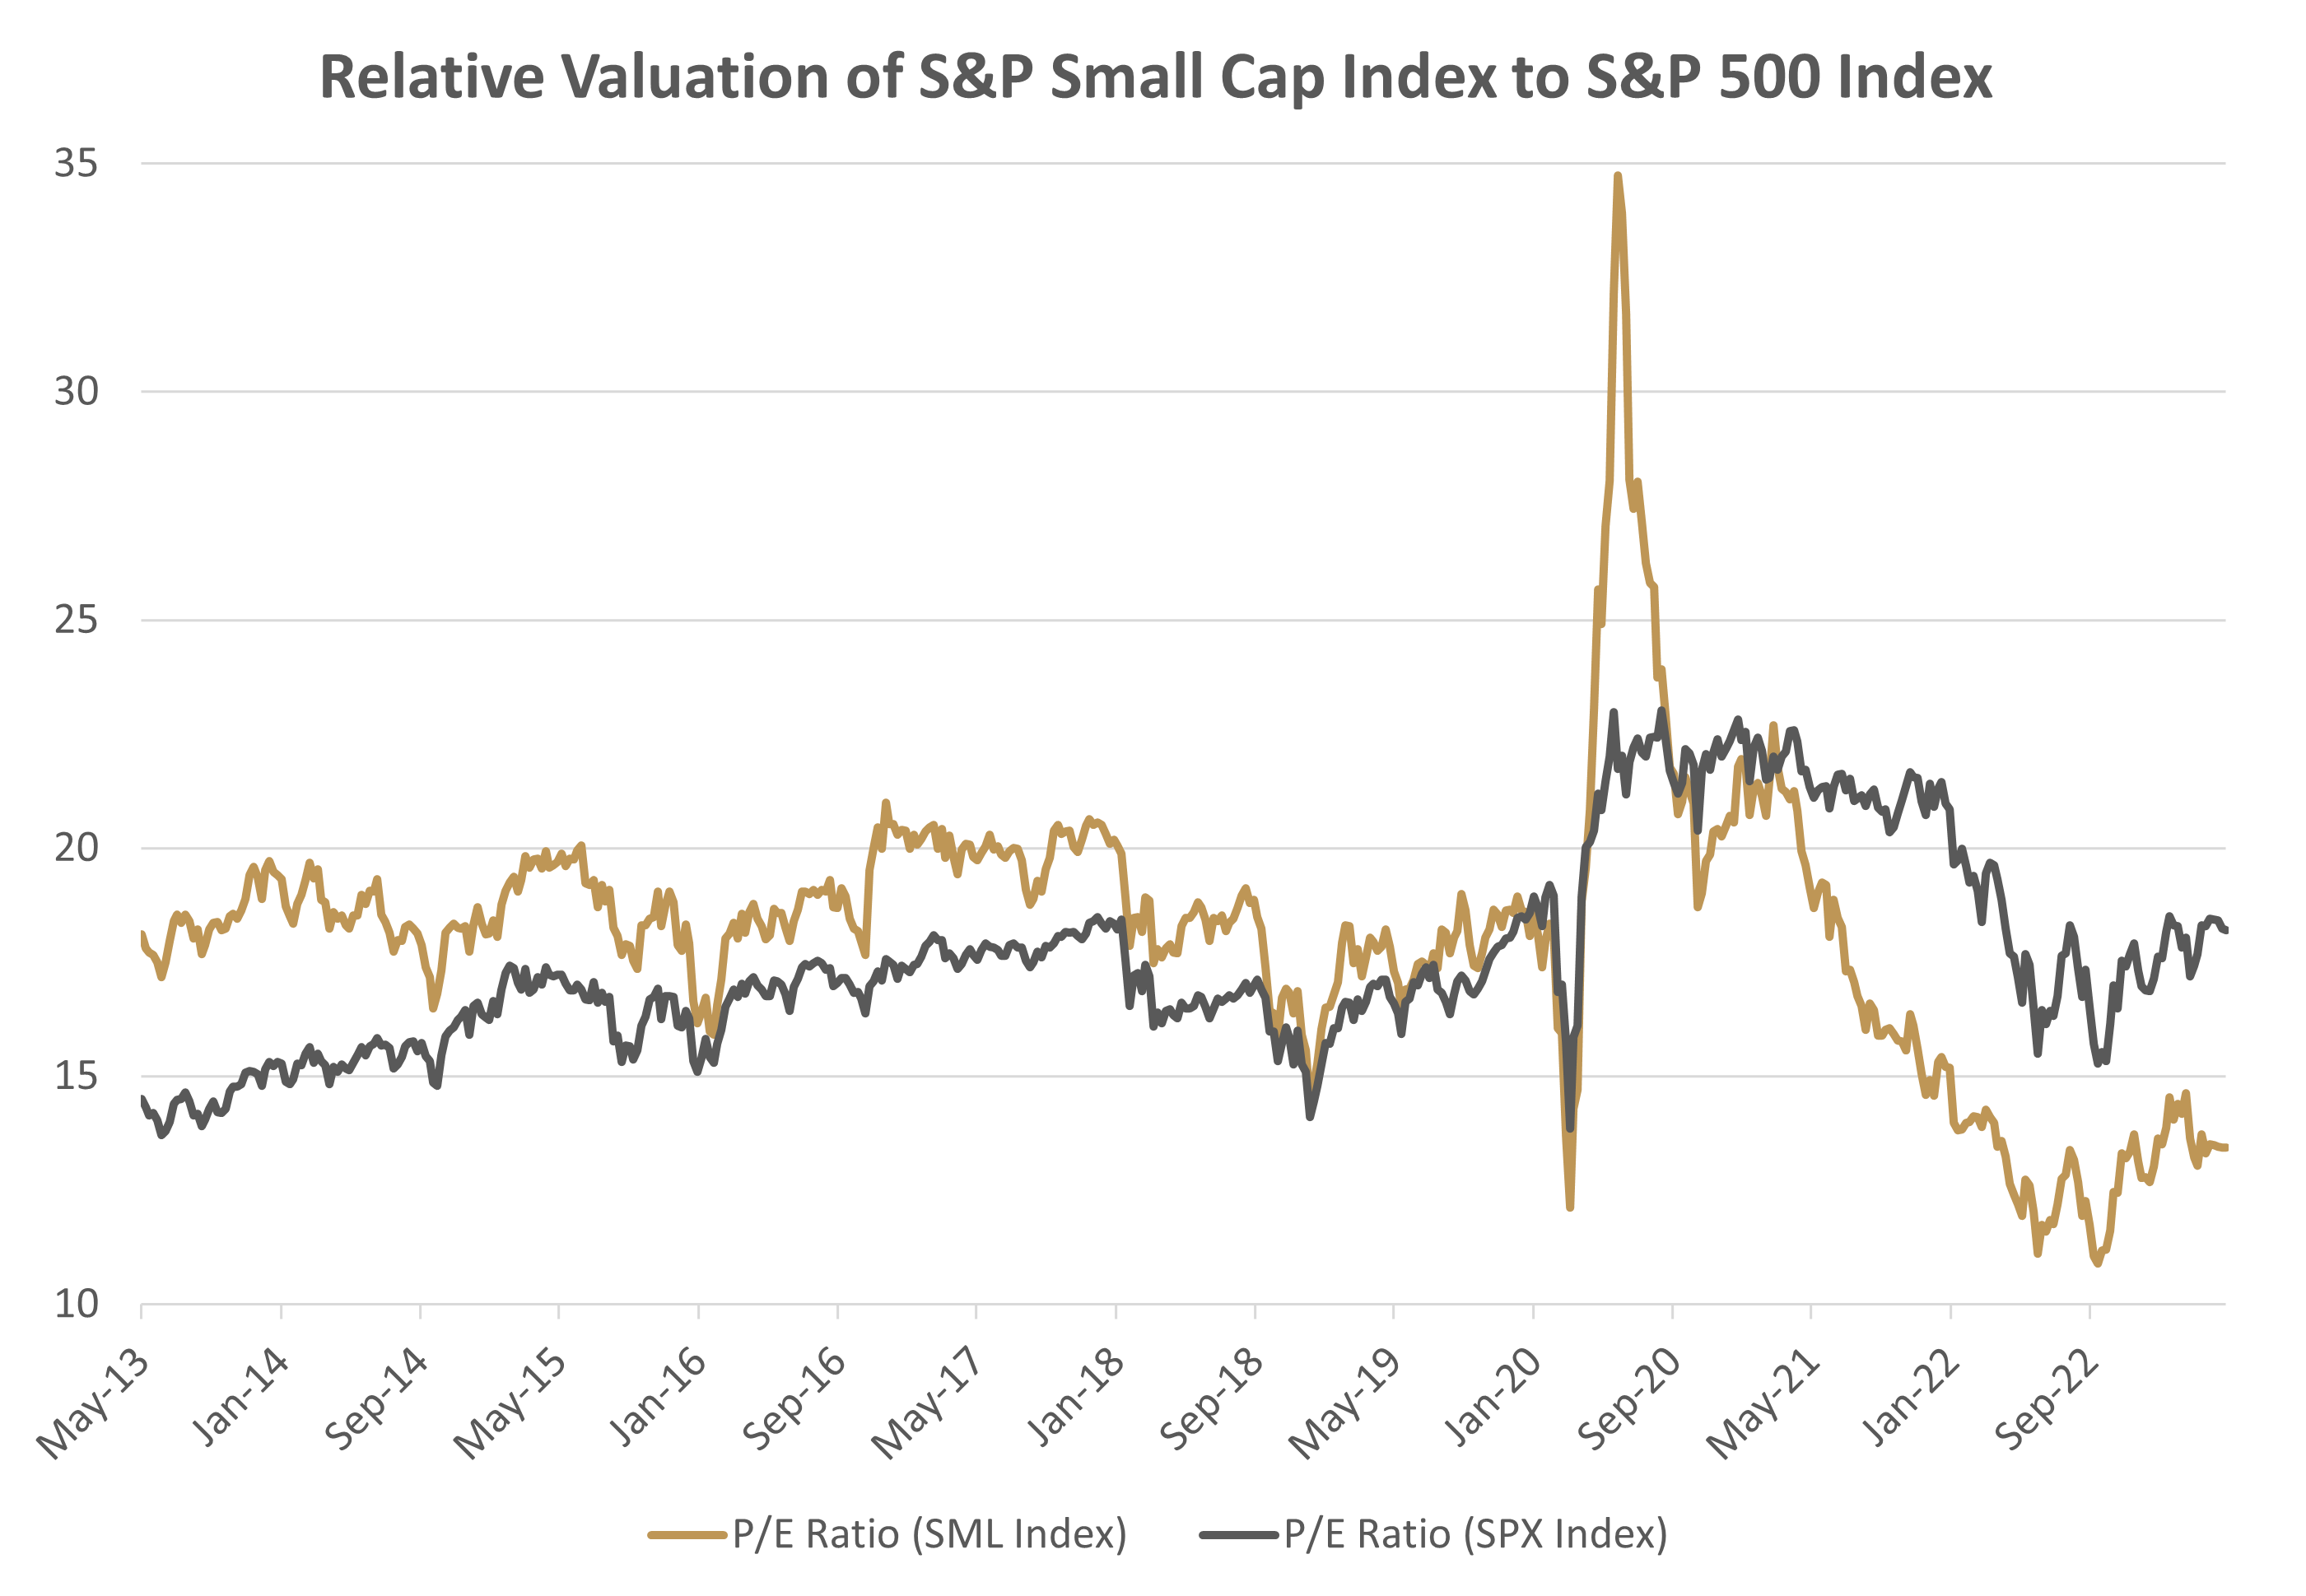 Relative Valuation of S&P Small Cap Index to S&P 500 Index
Source: Bloomberg